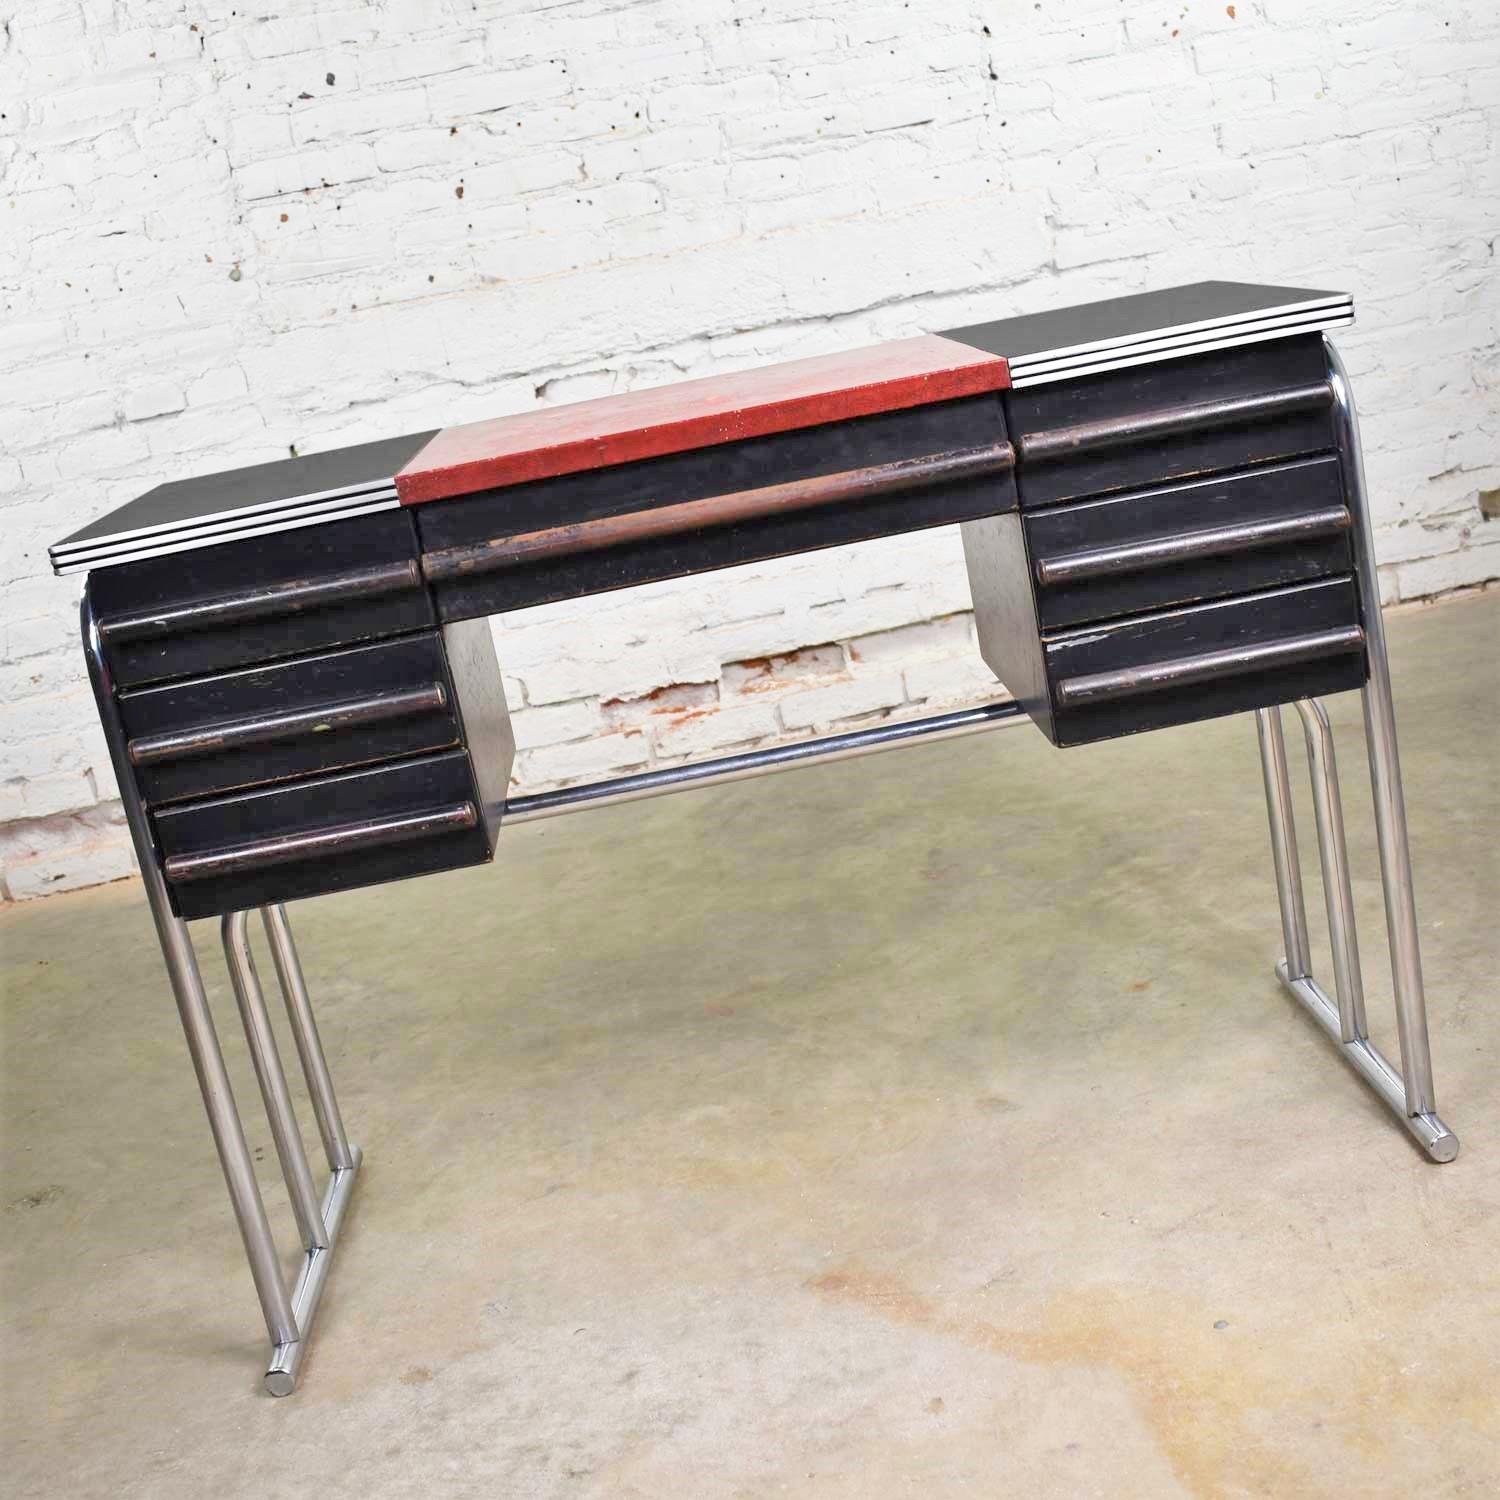 Fabulous Art Deco, Machine Age, Streamline Modern, Art Moderne, International style, Bauhaus desk or vanity in chrome, black painted wood with red faux leather insert possibly Fabrikoid and Bakelite or Cat-O-Lite (Catalin) top. This desk is